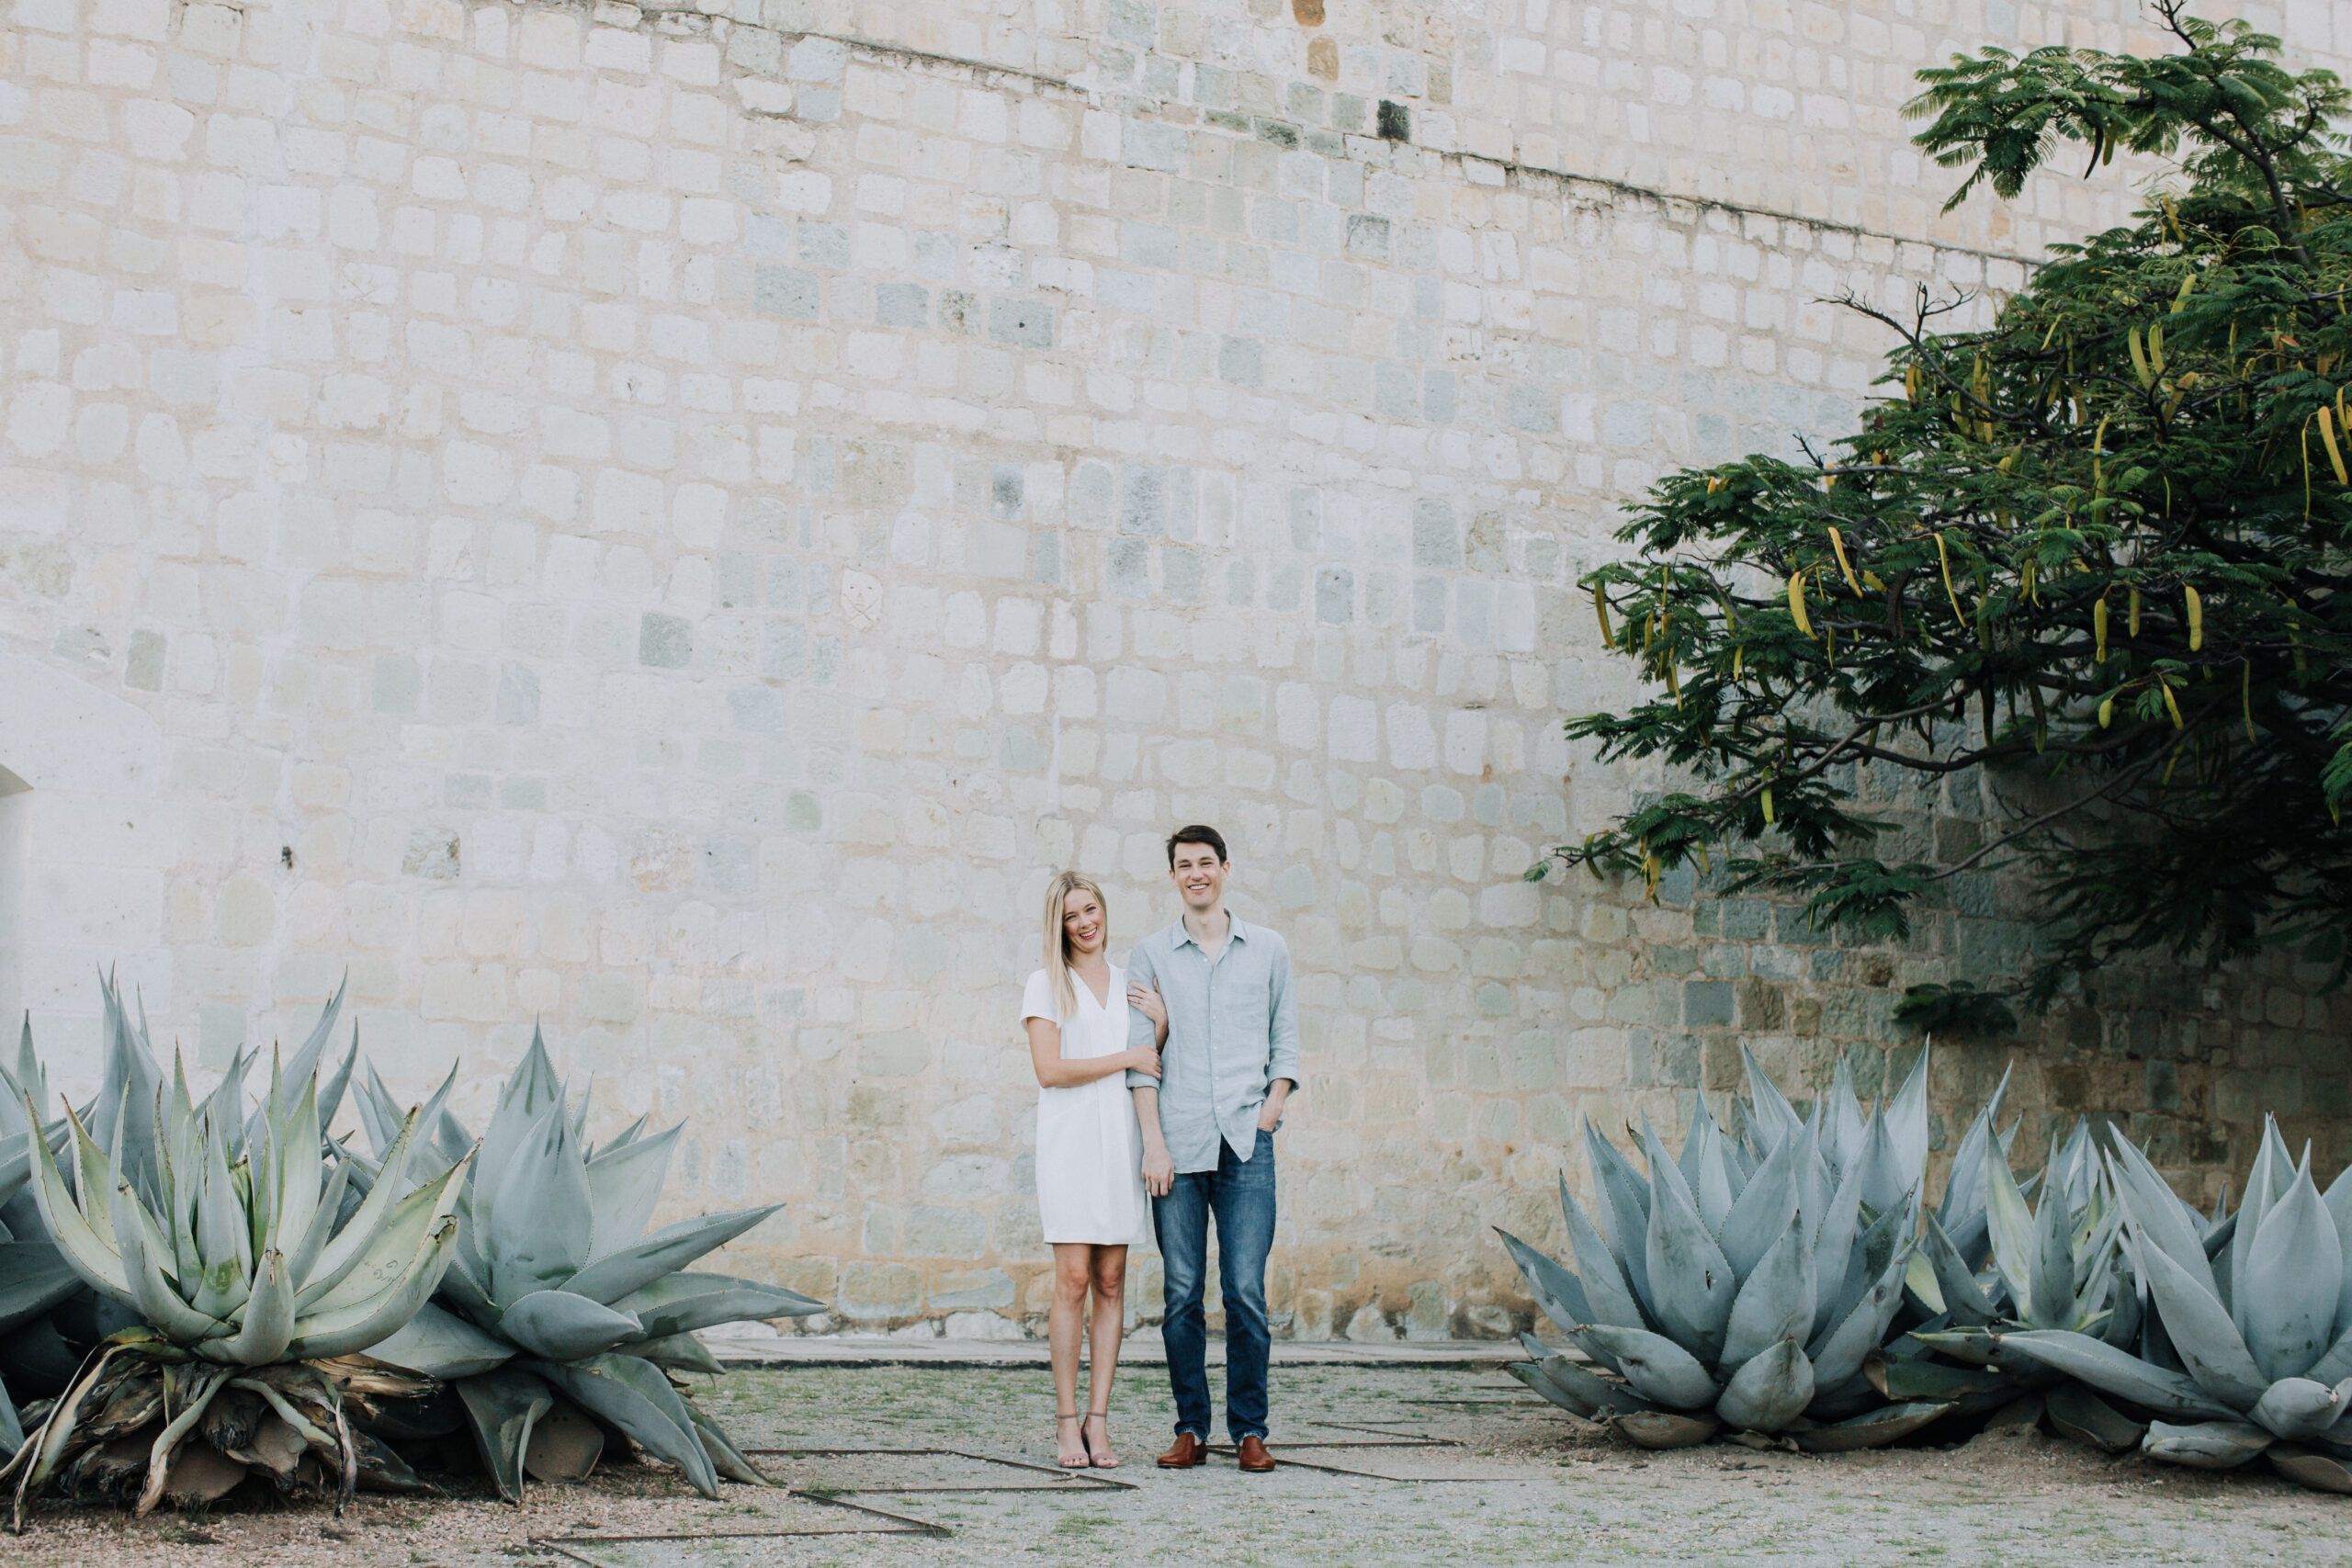 beautiful couple poses for their romantic oaxaca engagement photoshoot against a colorful back wall